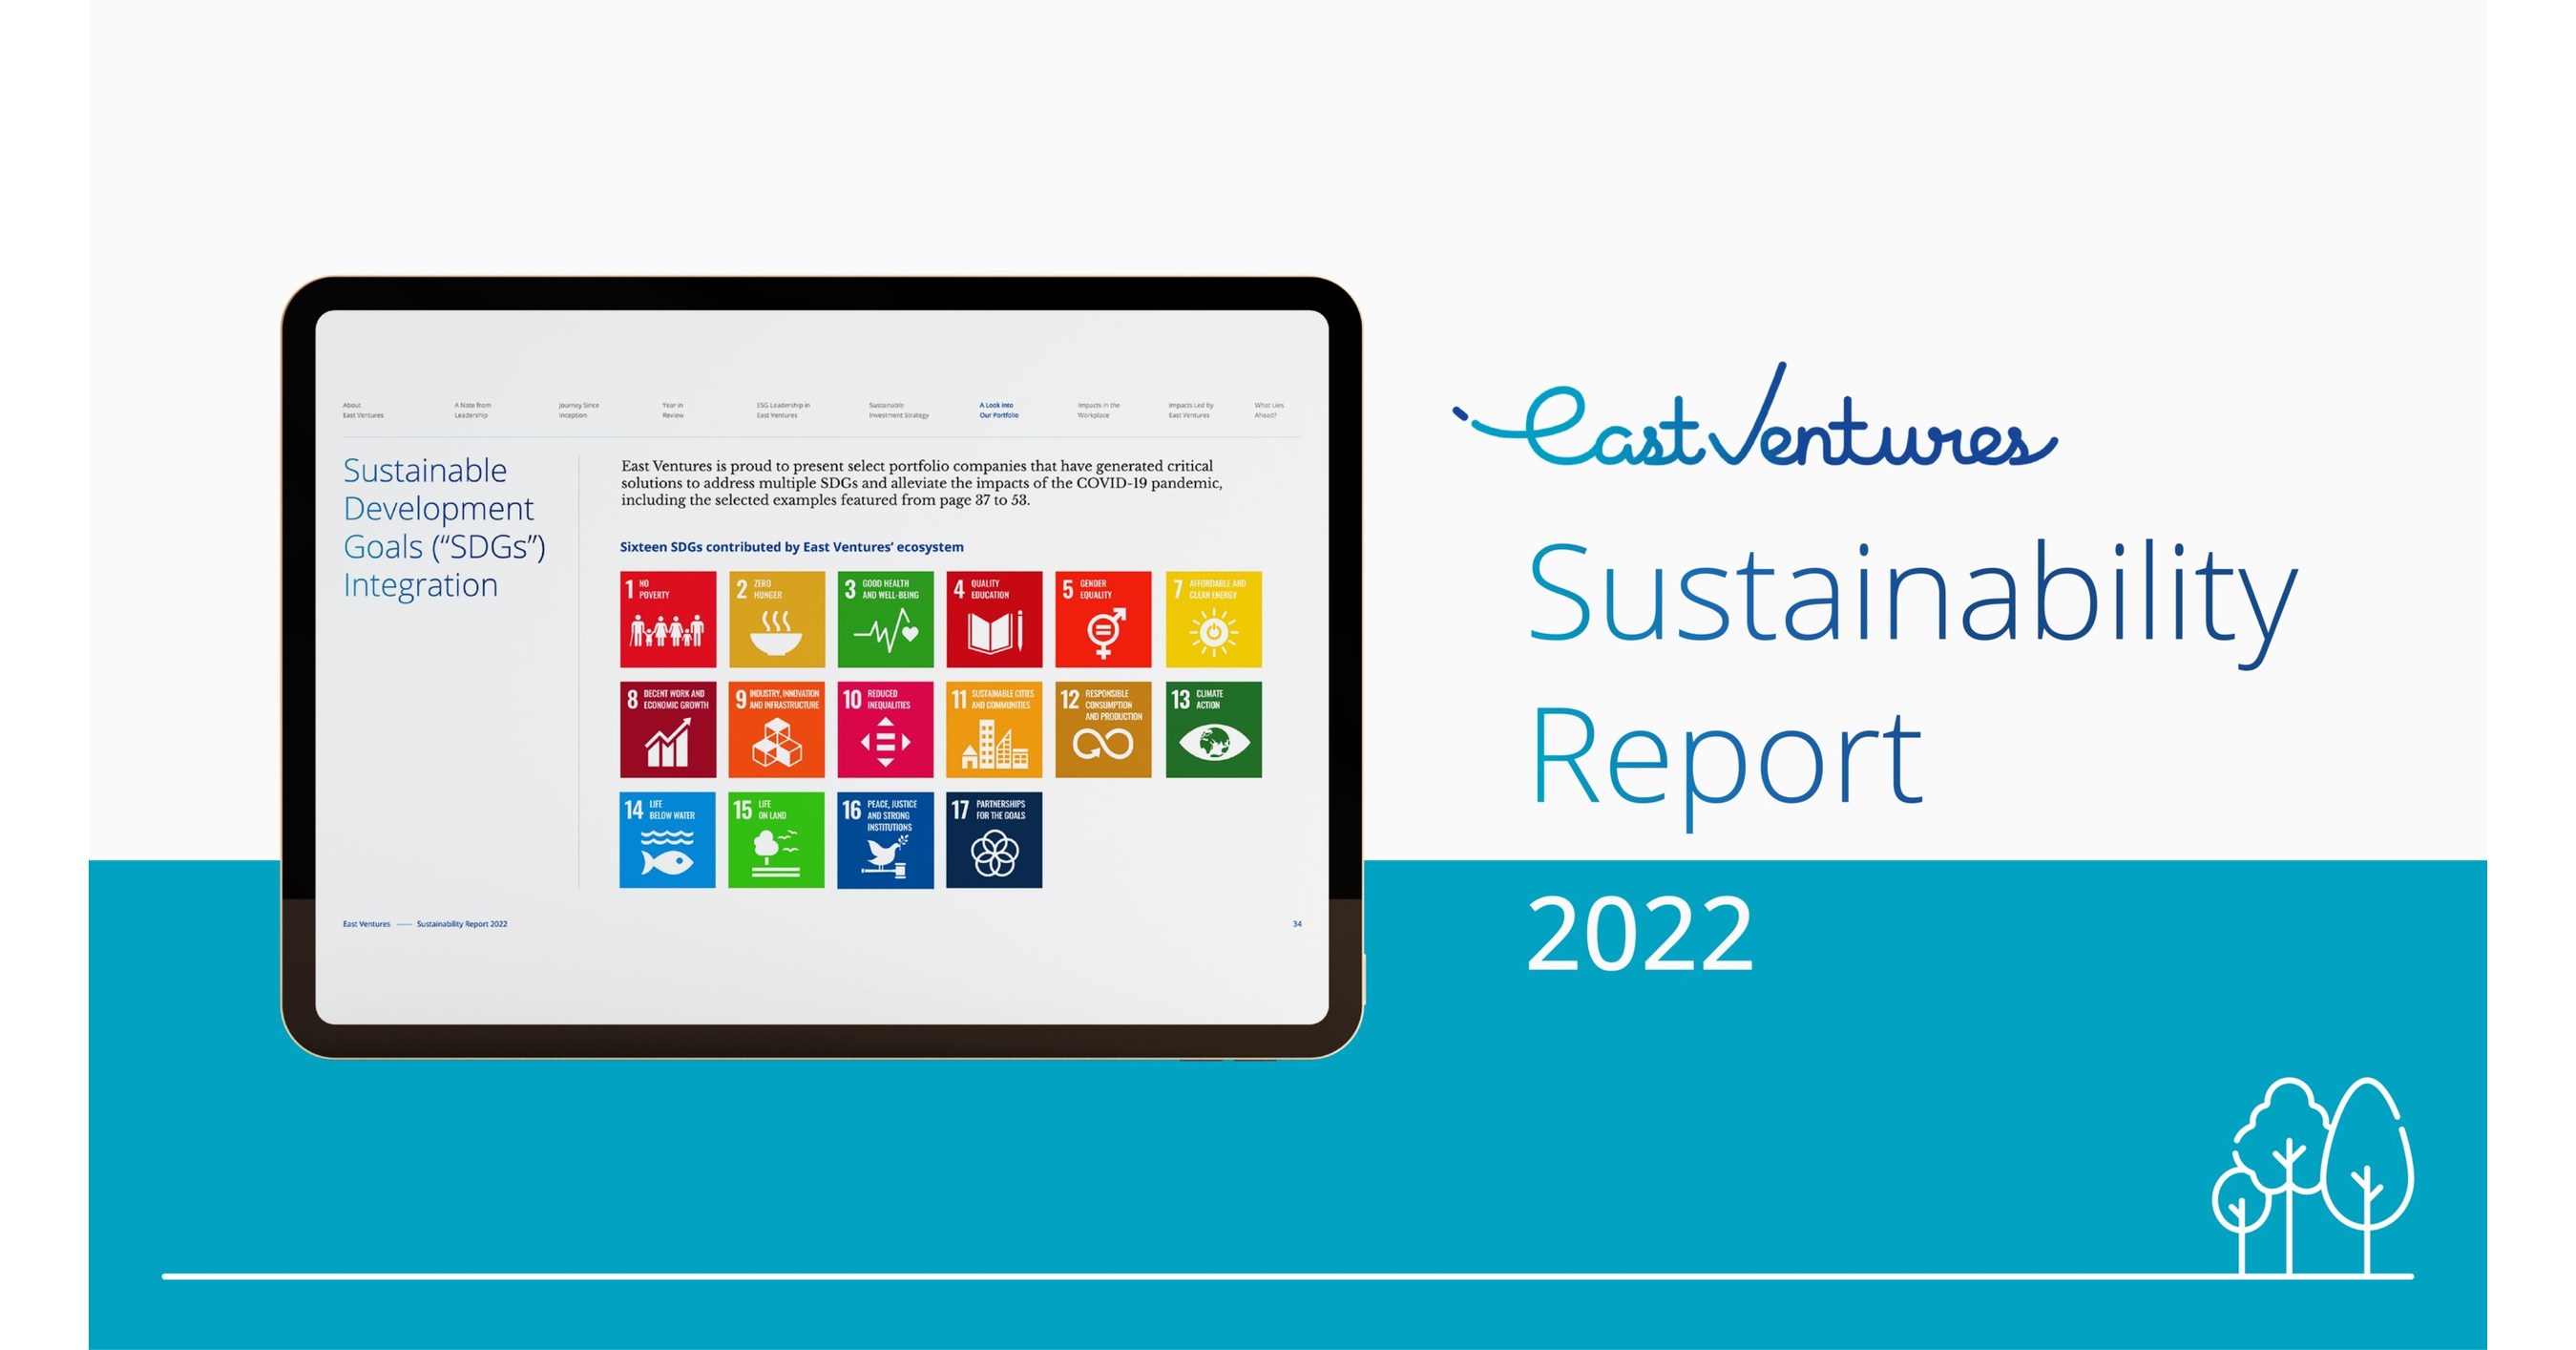 East Ventures launches its inaugural Sustainability Report 2022